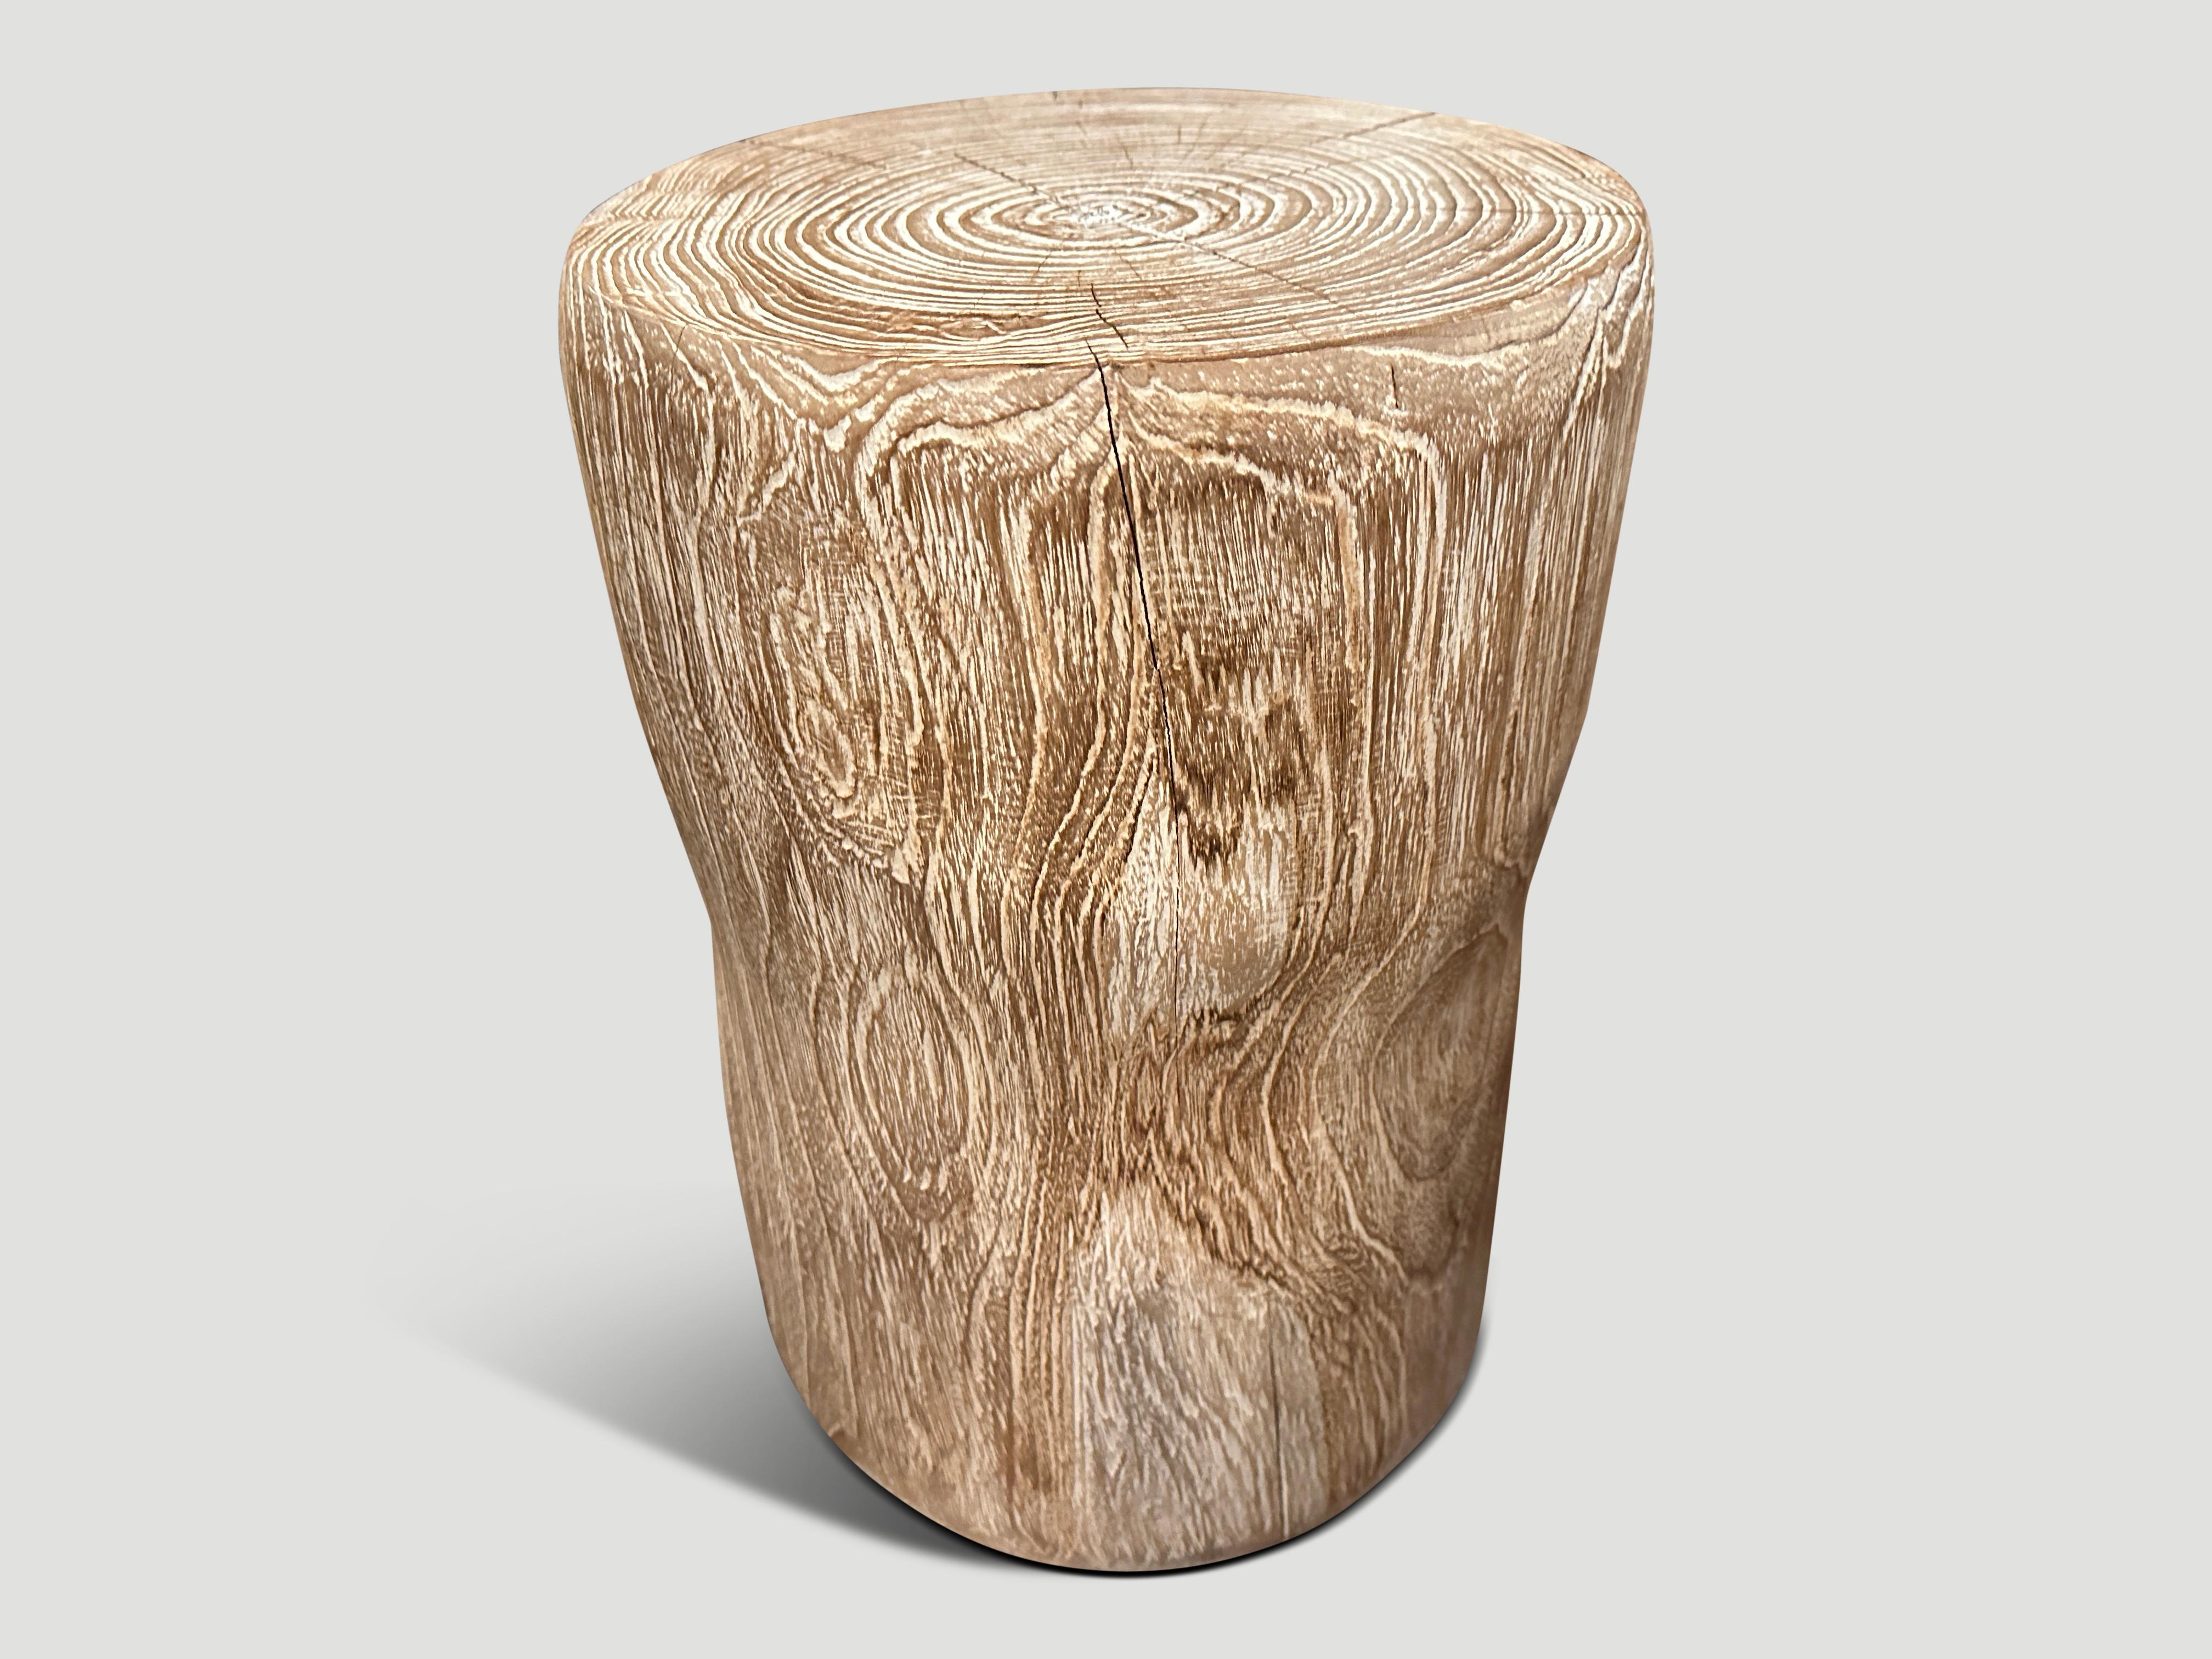 Hand carved cerused teak side table or stool with a subtle hourglass shape. Celebrating the cracks and crevices found in reclaimed teak wood. This style works well in a variety of settings such as seating or side tables, as shown in the bottom image